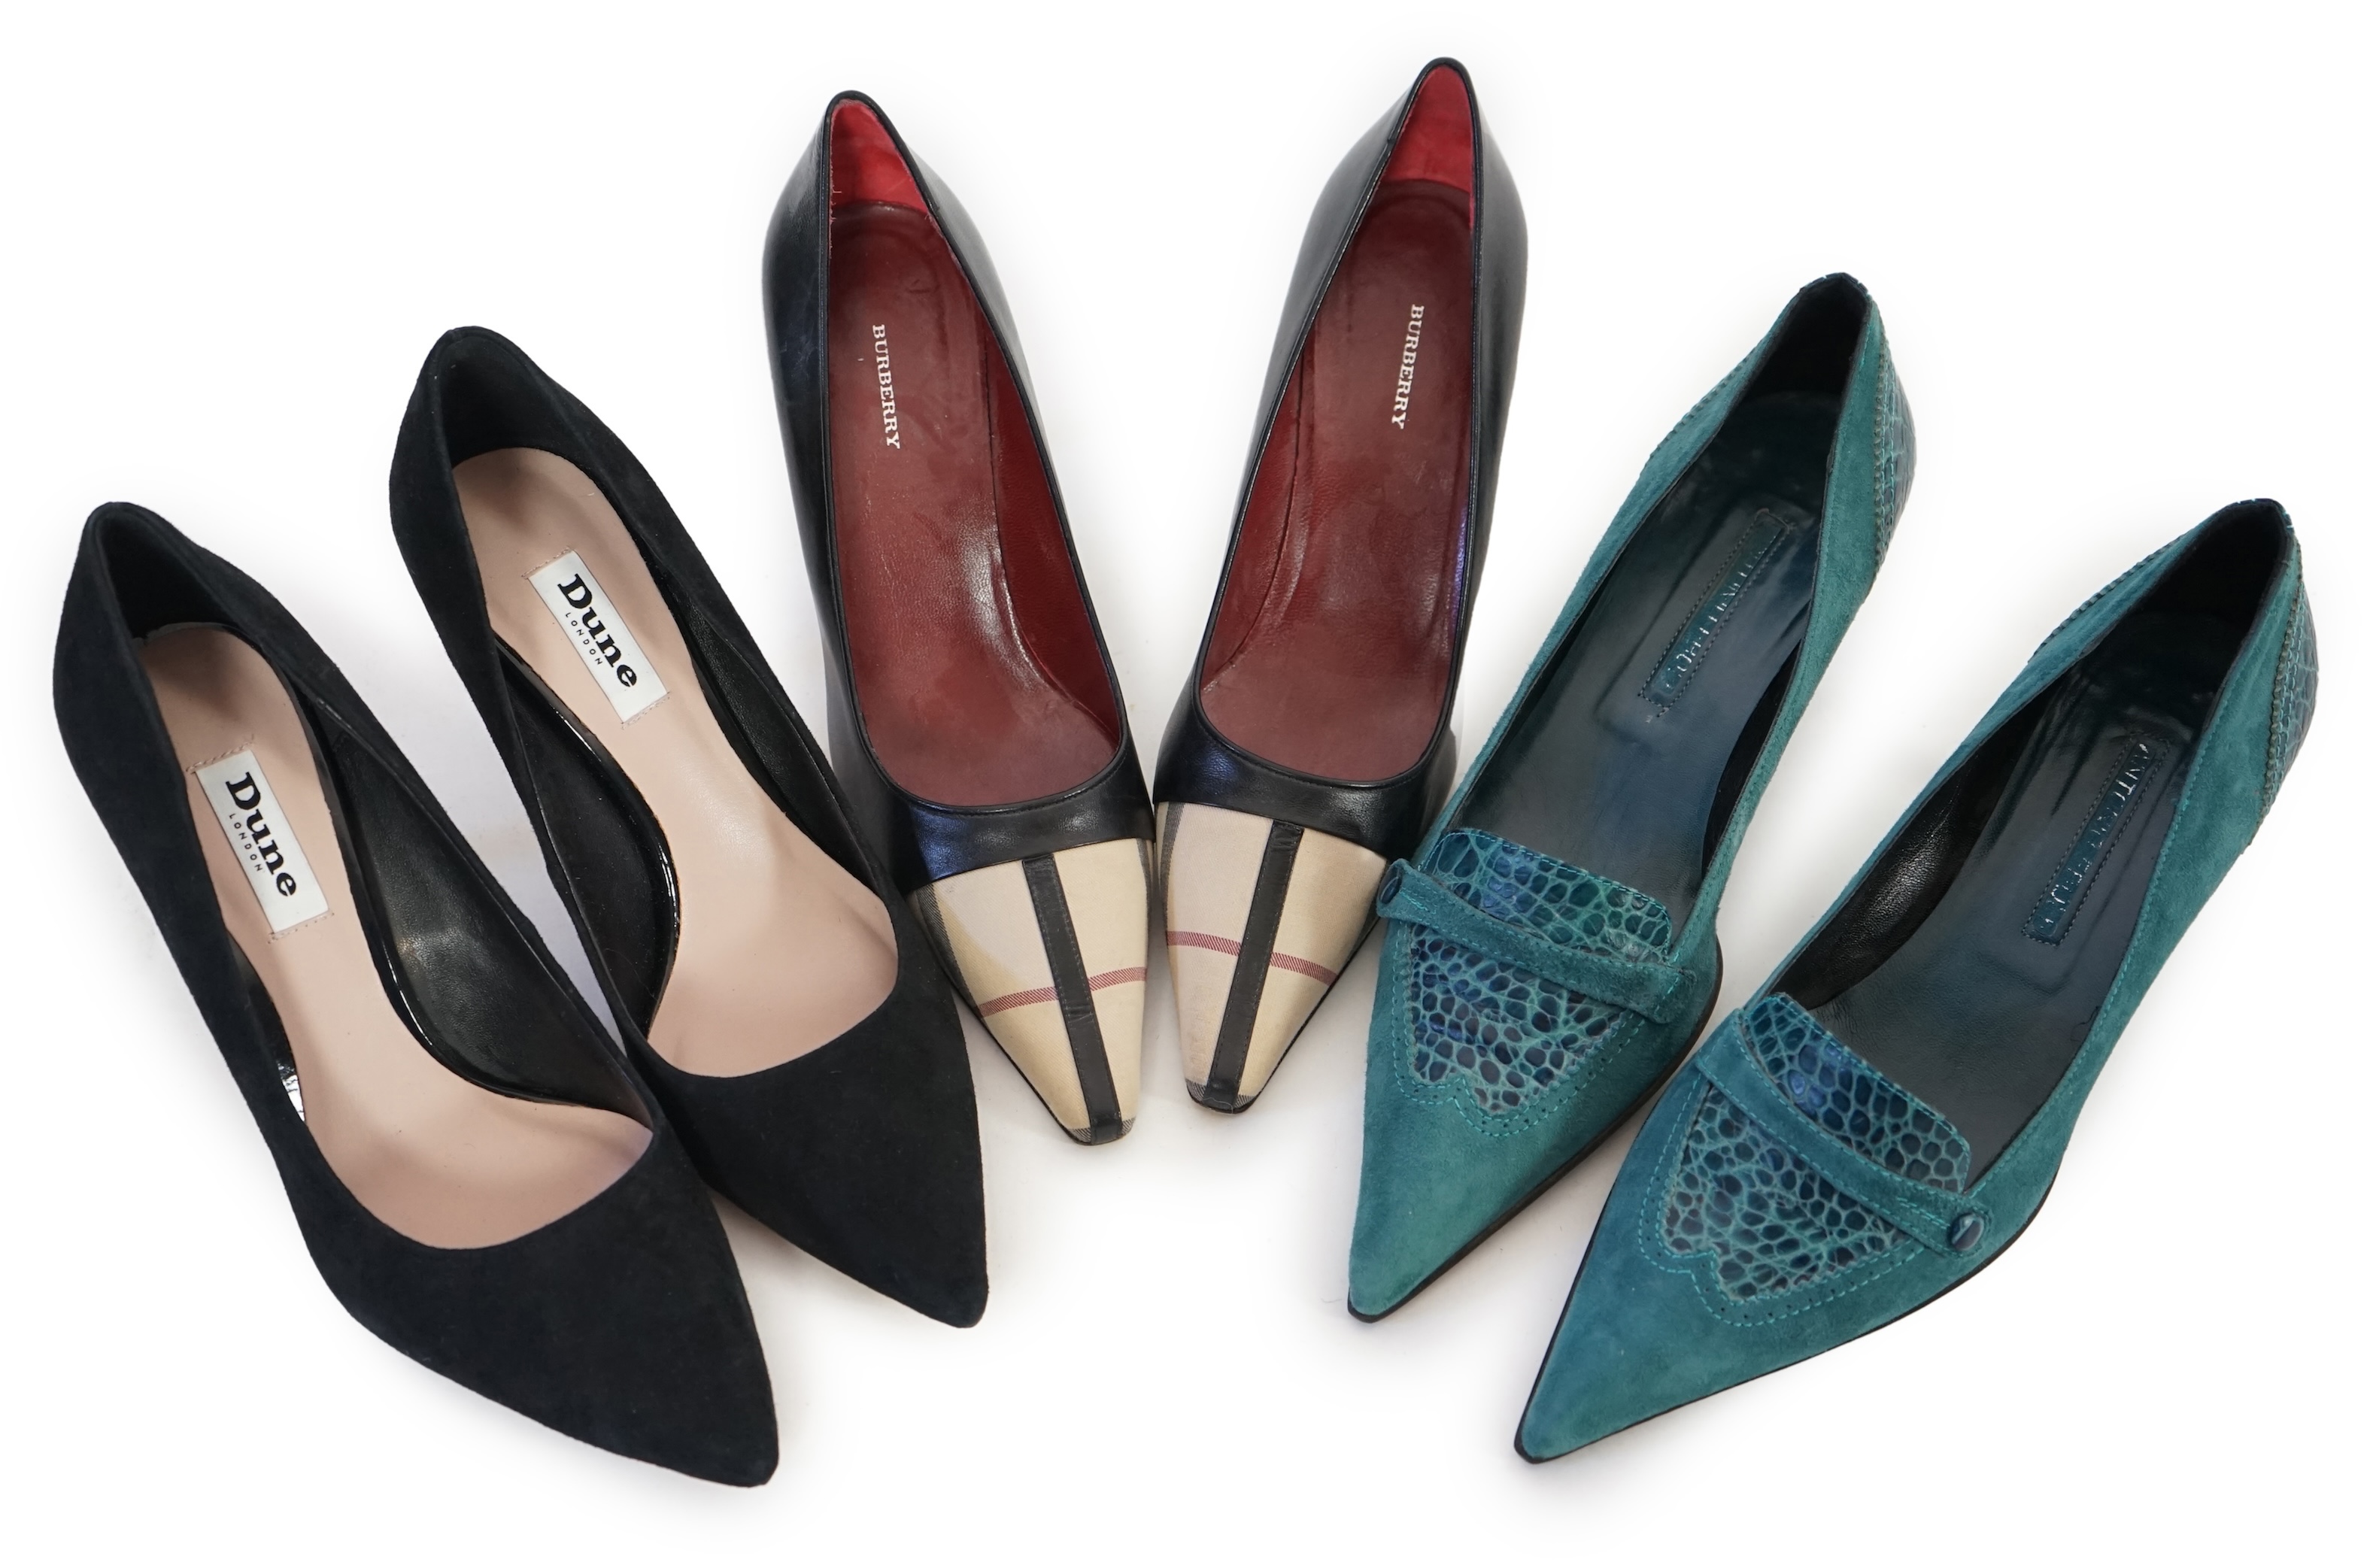 A pair of Burberry lady's black heeled pumps with tartan canvas toe detail, a pair of unworn Dune black suede heeled pumps, a pair of teal suede and mock croc leather detail kitten heeled pumps. Three pairs in total. Siz